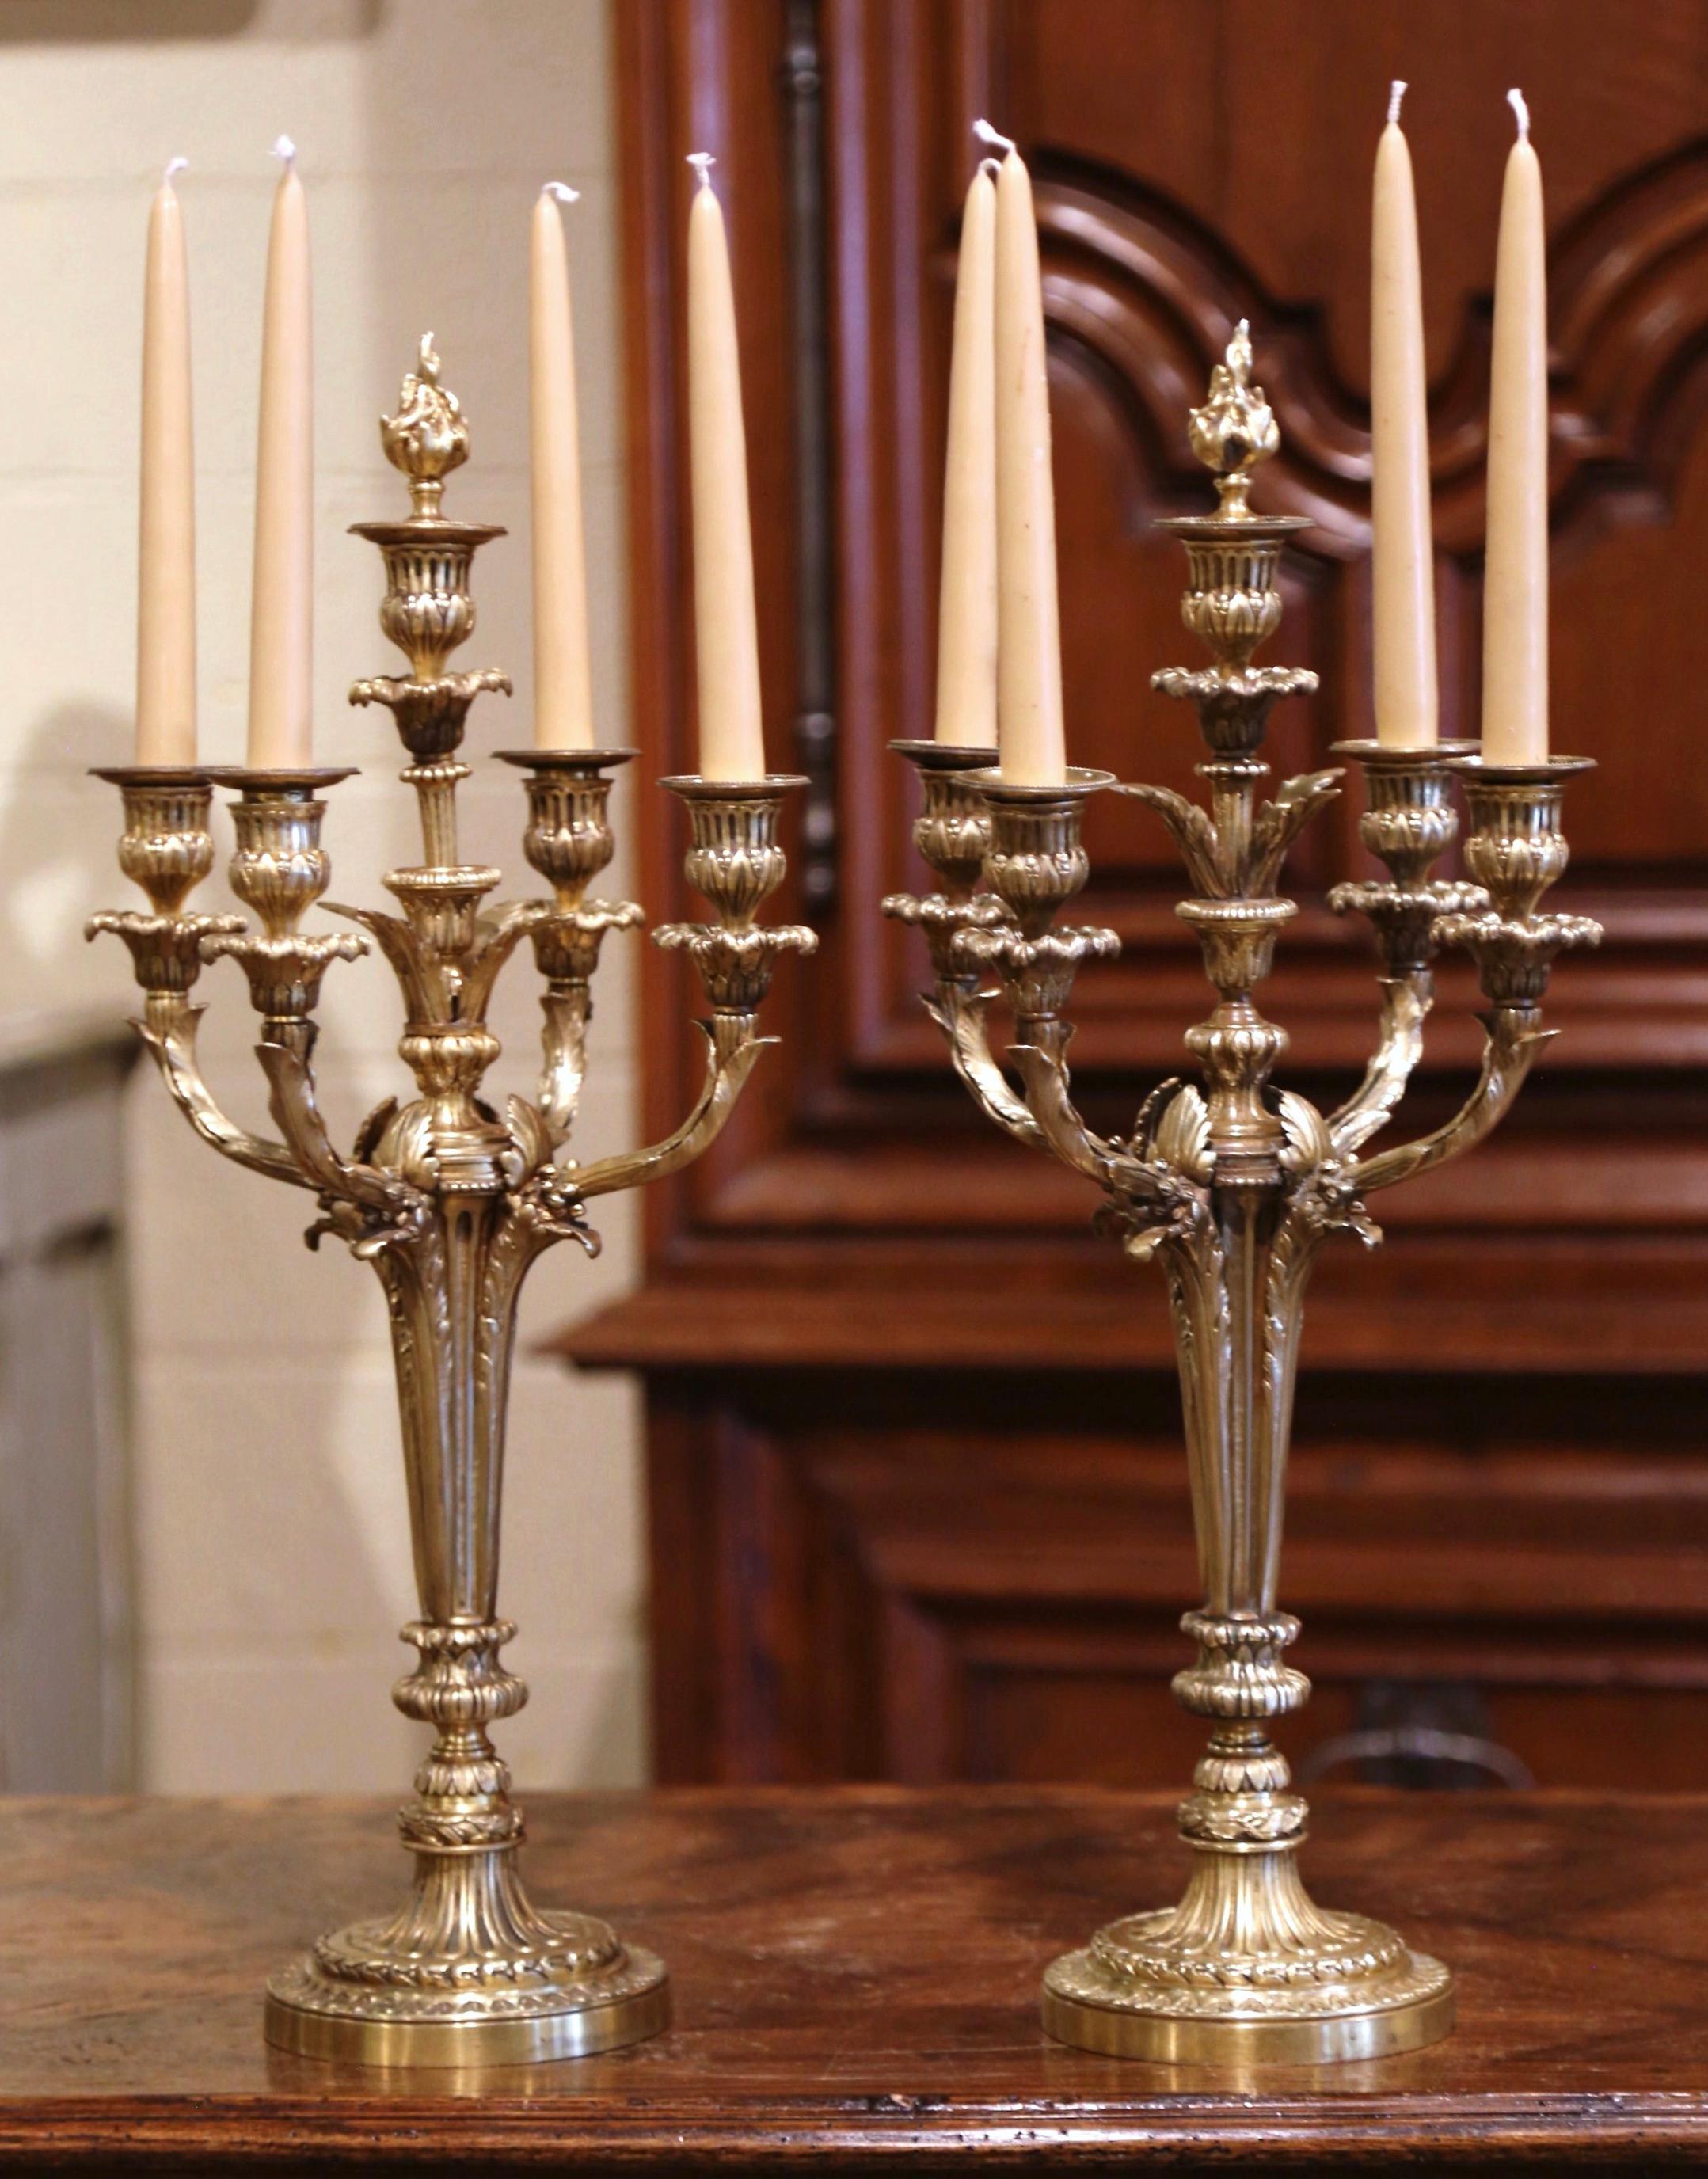 Decorate a mantel or a dining room table with this elegant pair of antique candleholders. Crafted in France circa 1870, each 